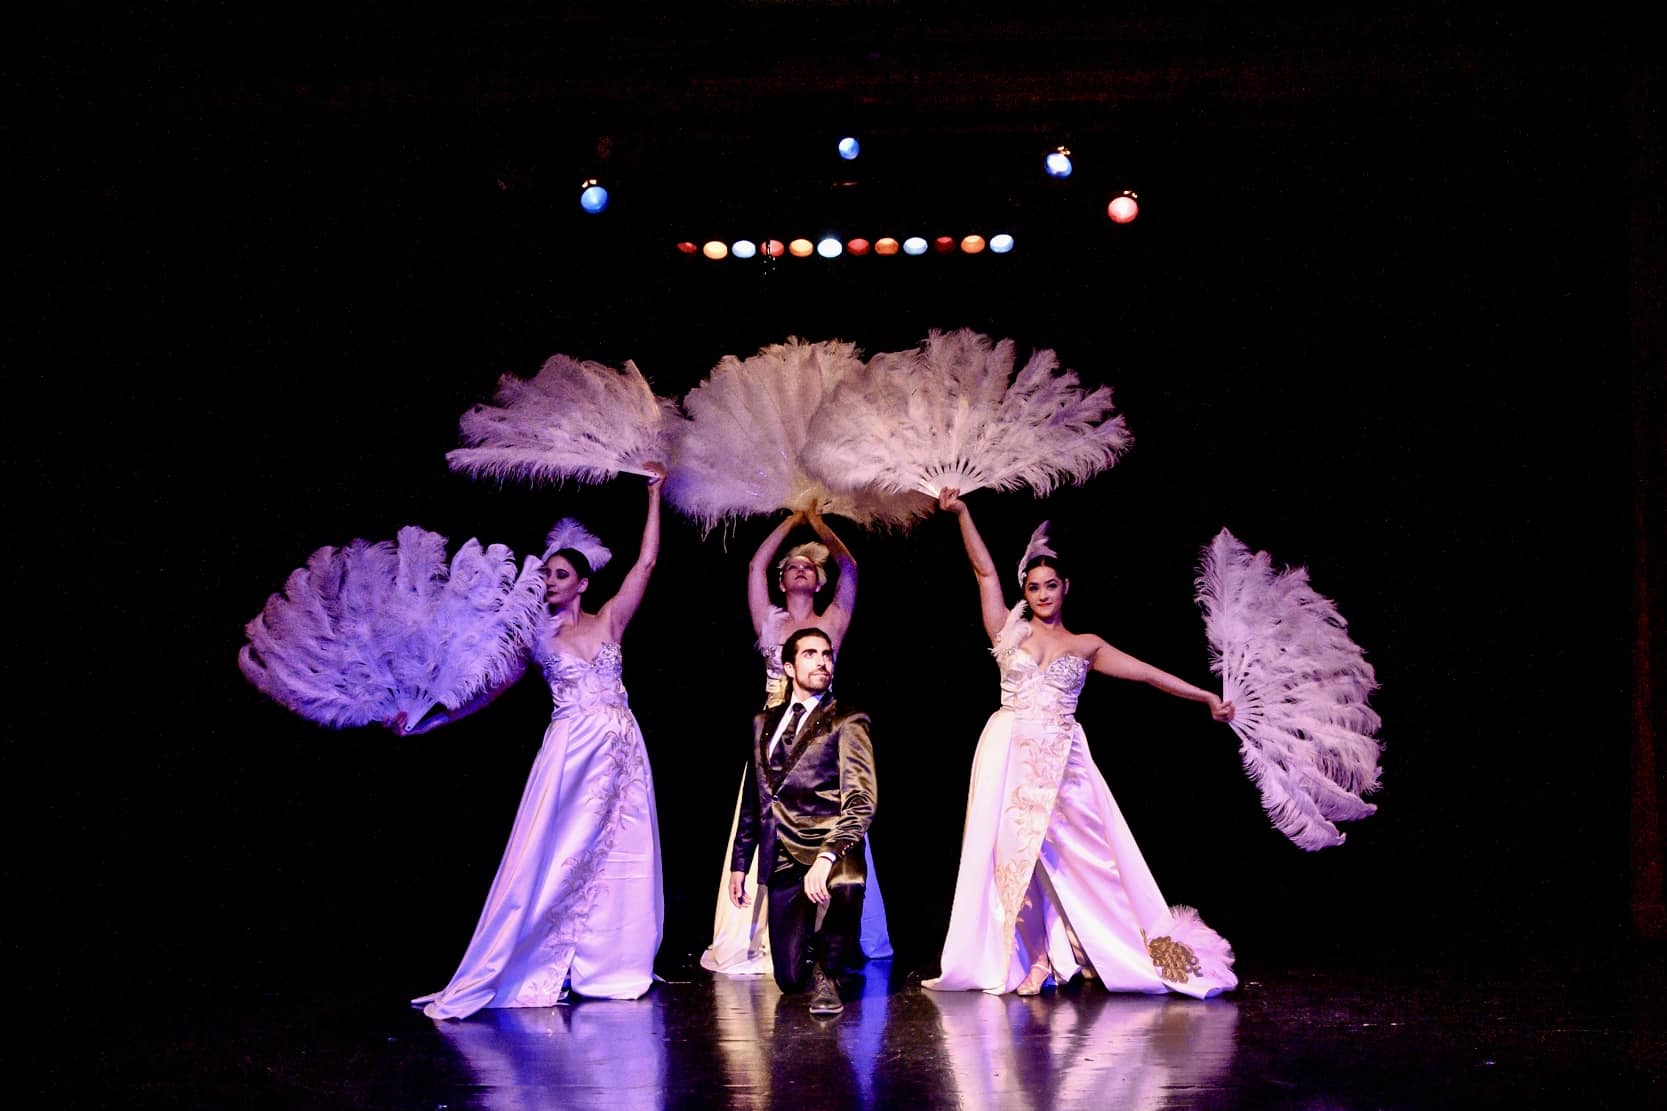 Performers in gorgeous ball gowns perform on-stage at a "BROADWAY in @ The..."experience in Los Angeles.